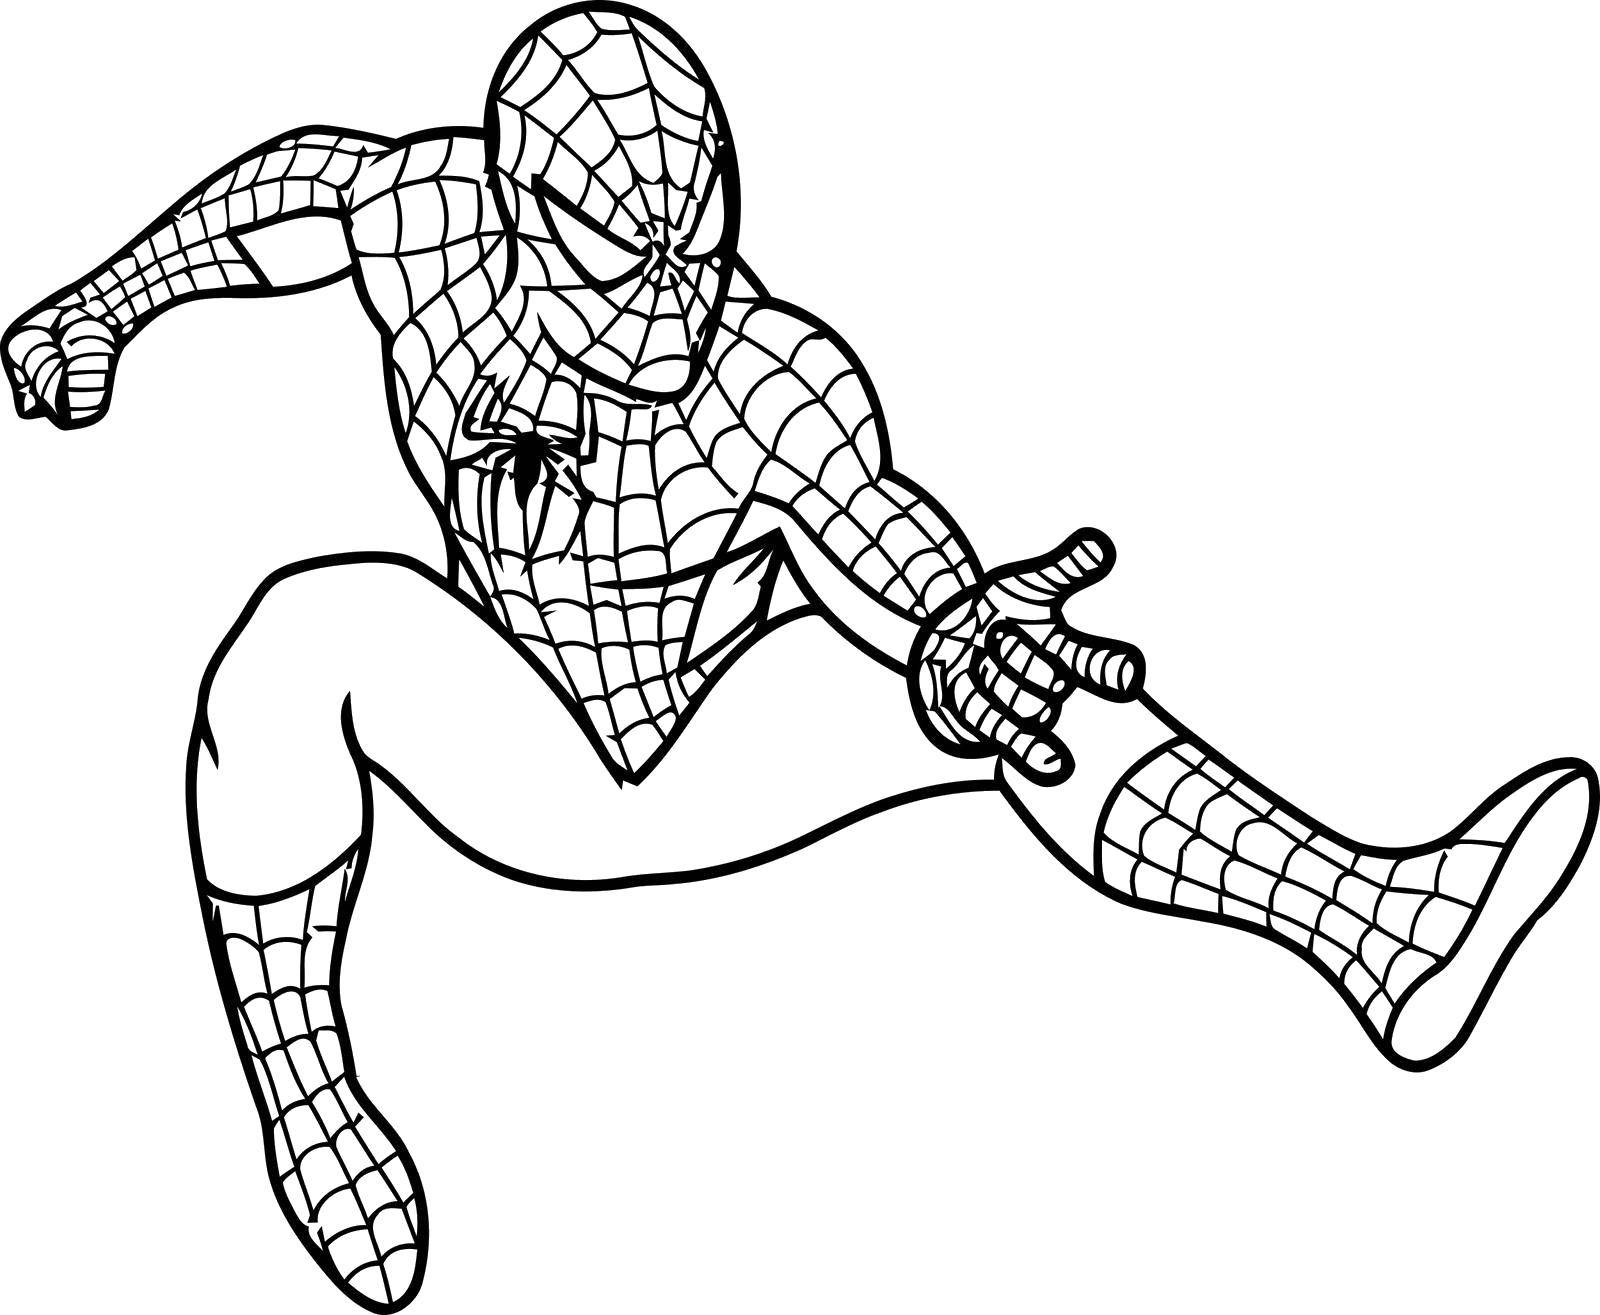 Coloring Spiderman produces webs. Category spider man. Tags:  Comics, Spider-Man, Spider-Man.